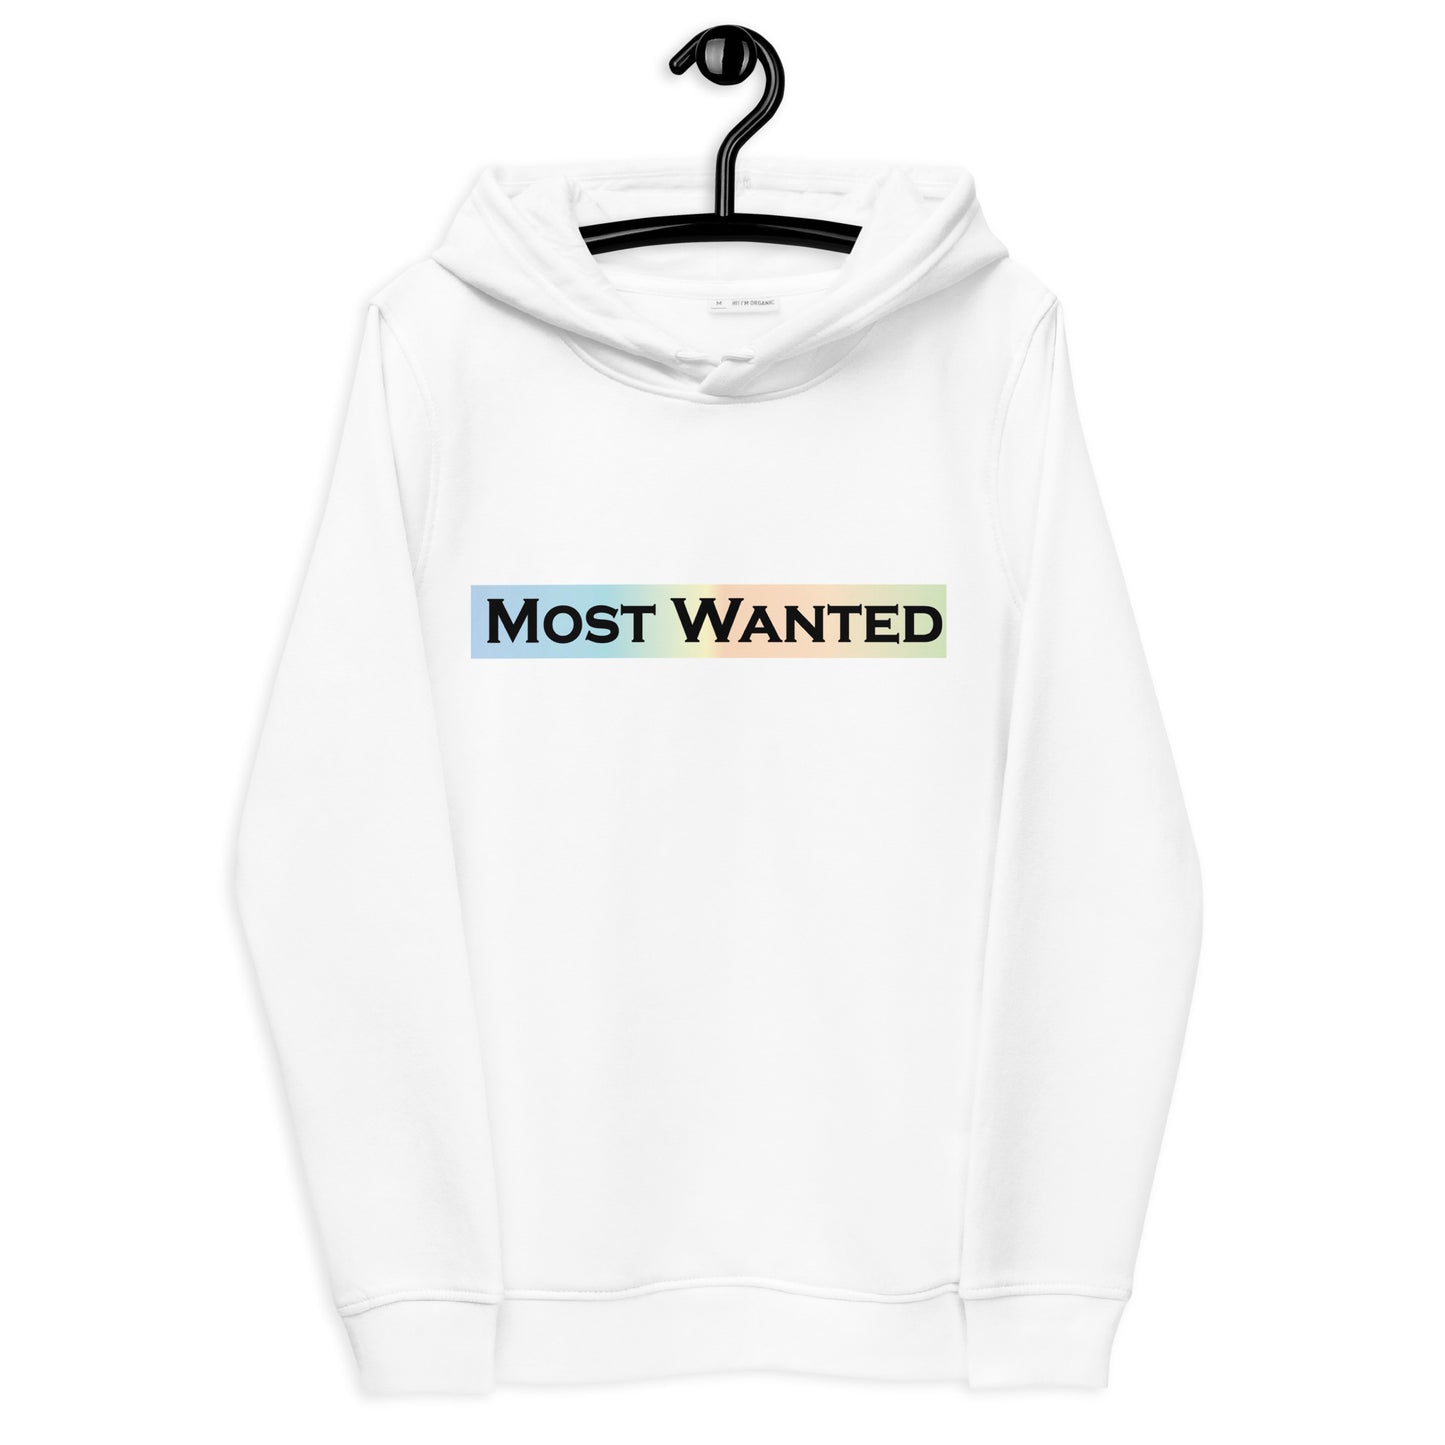 Most Wanted- Say less (Women's)